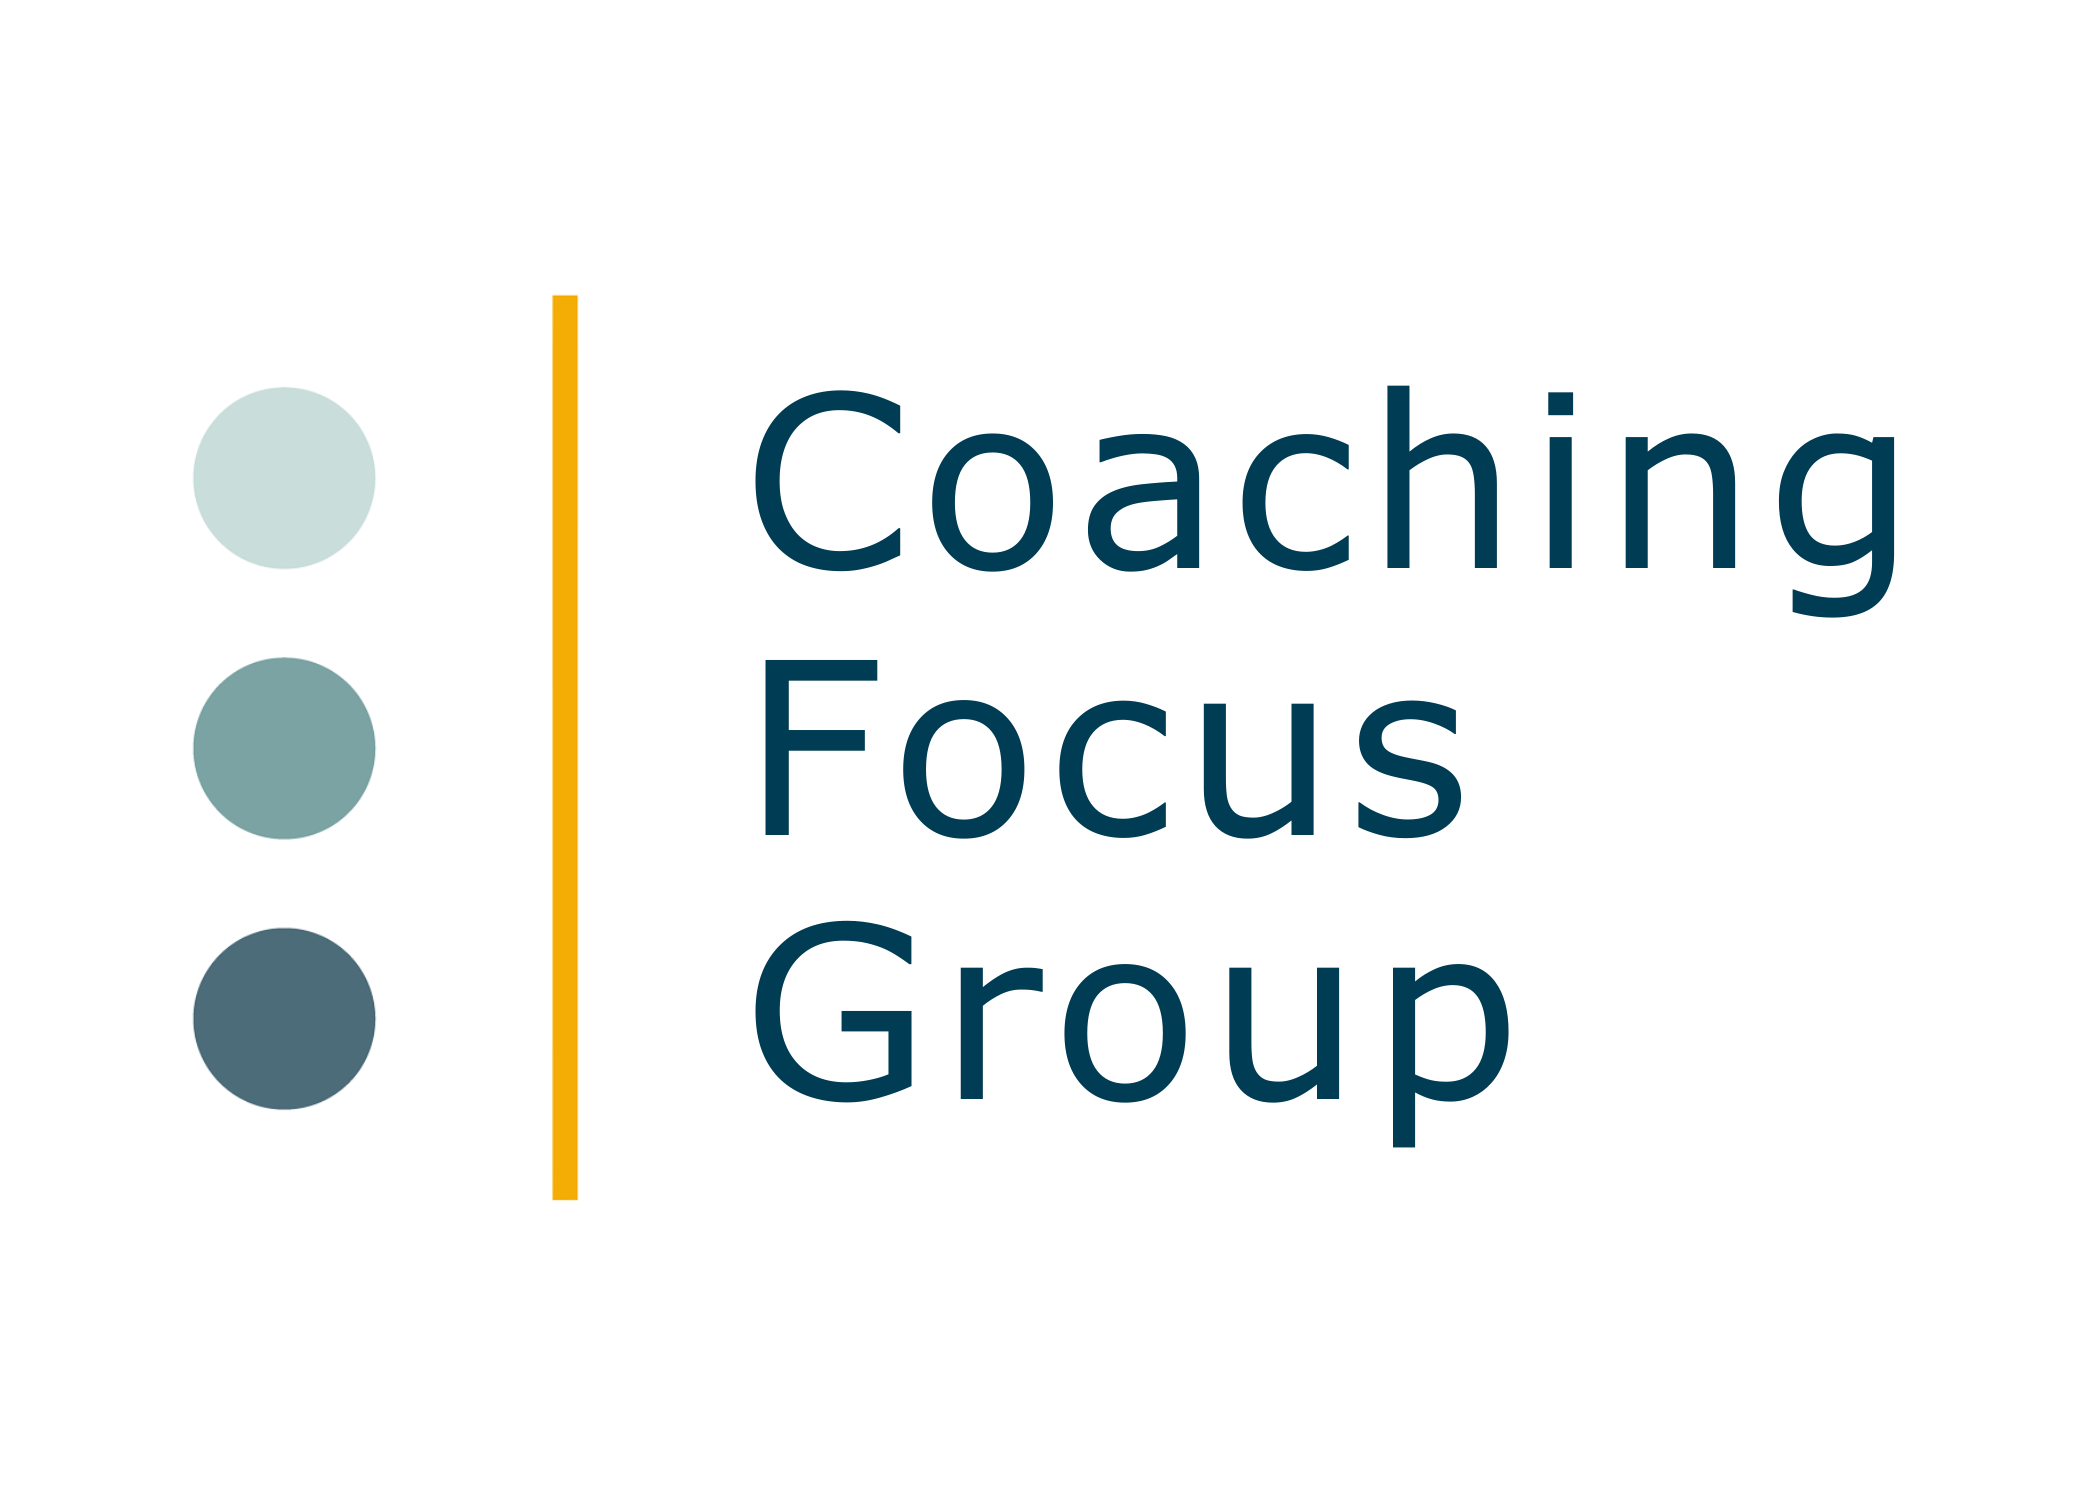 Coaching Focus Group - for light backgrounds